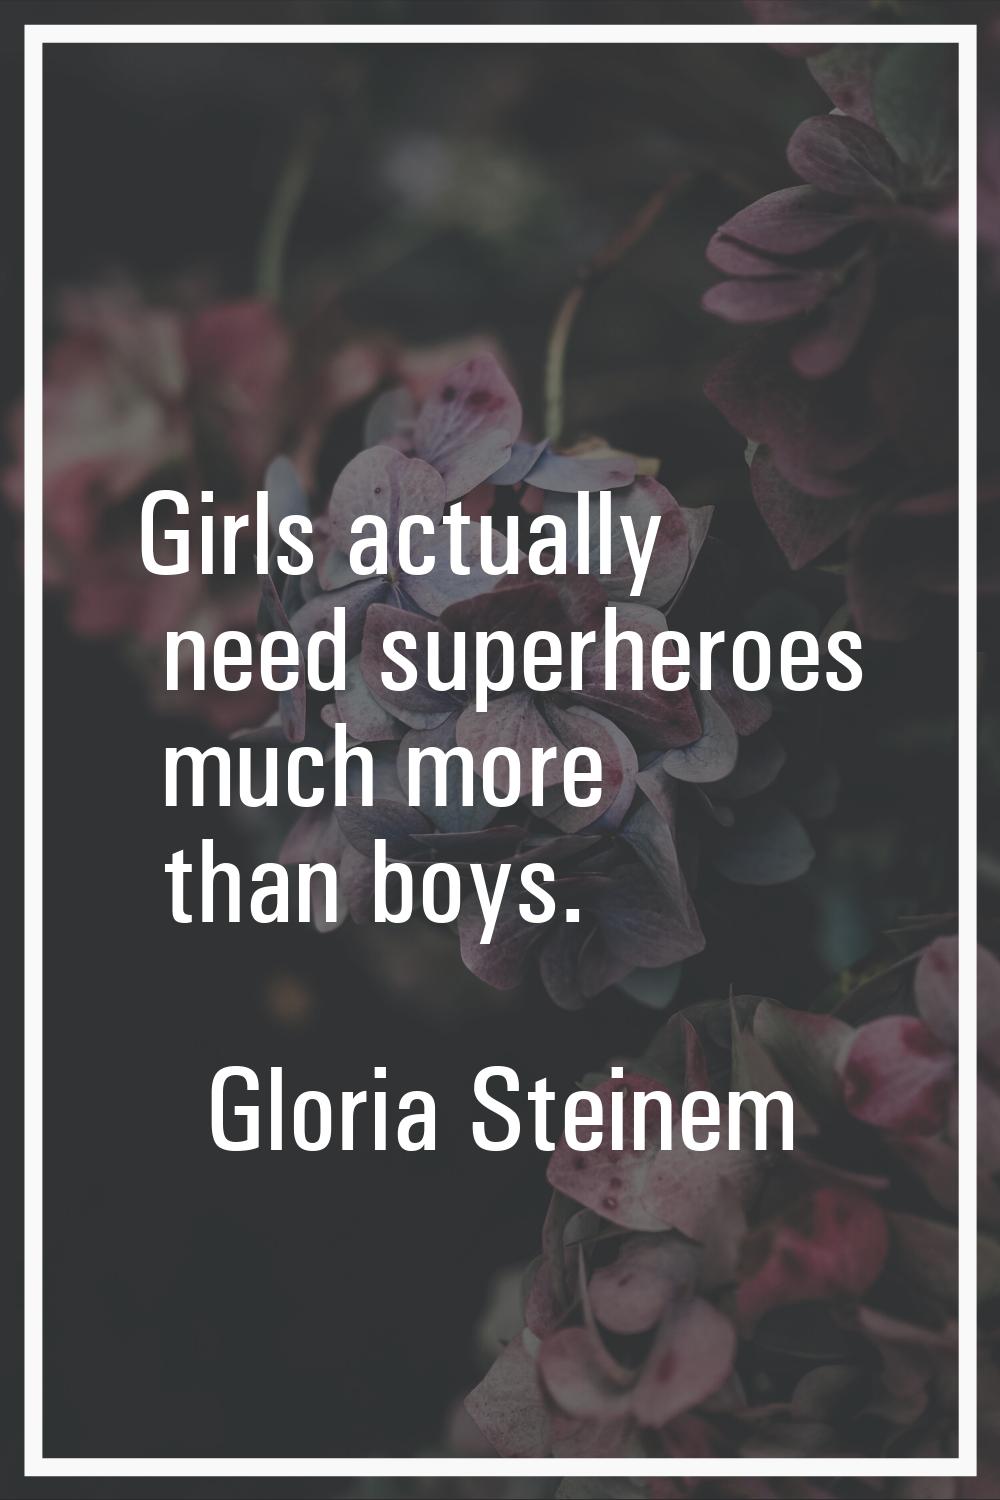 Girls actually need superheroes much more than boys.